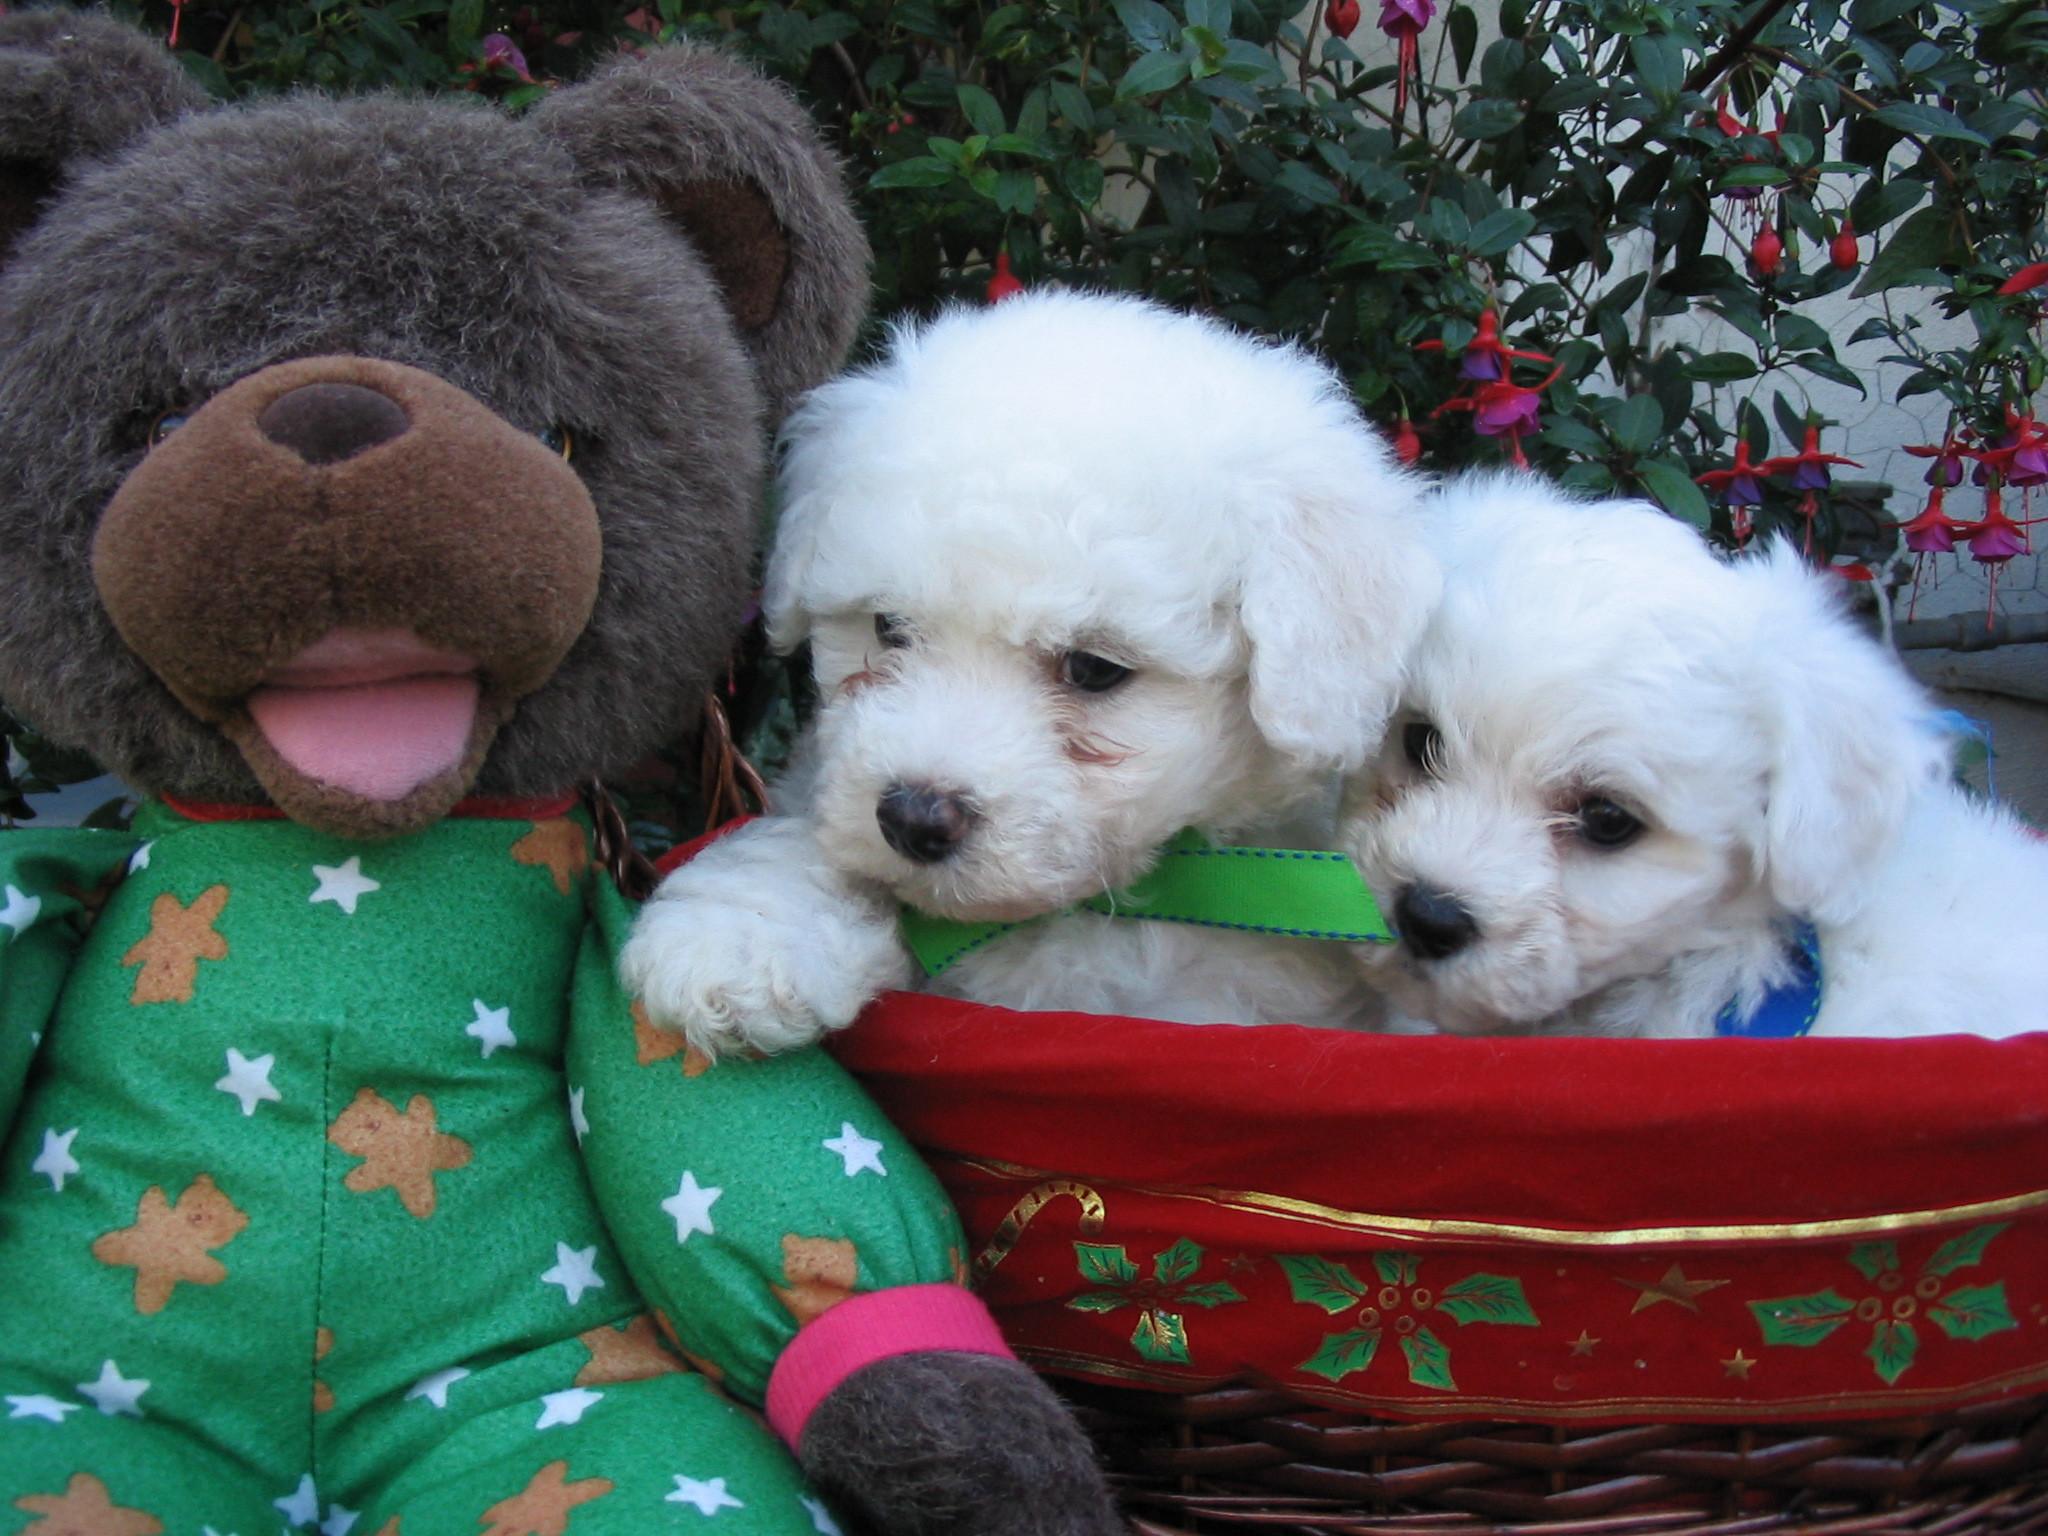 Puppies breed Bichon Frise and stuffed toy wallpaper and image